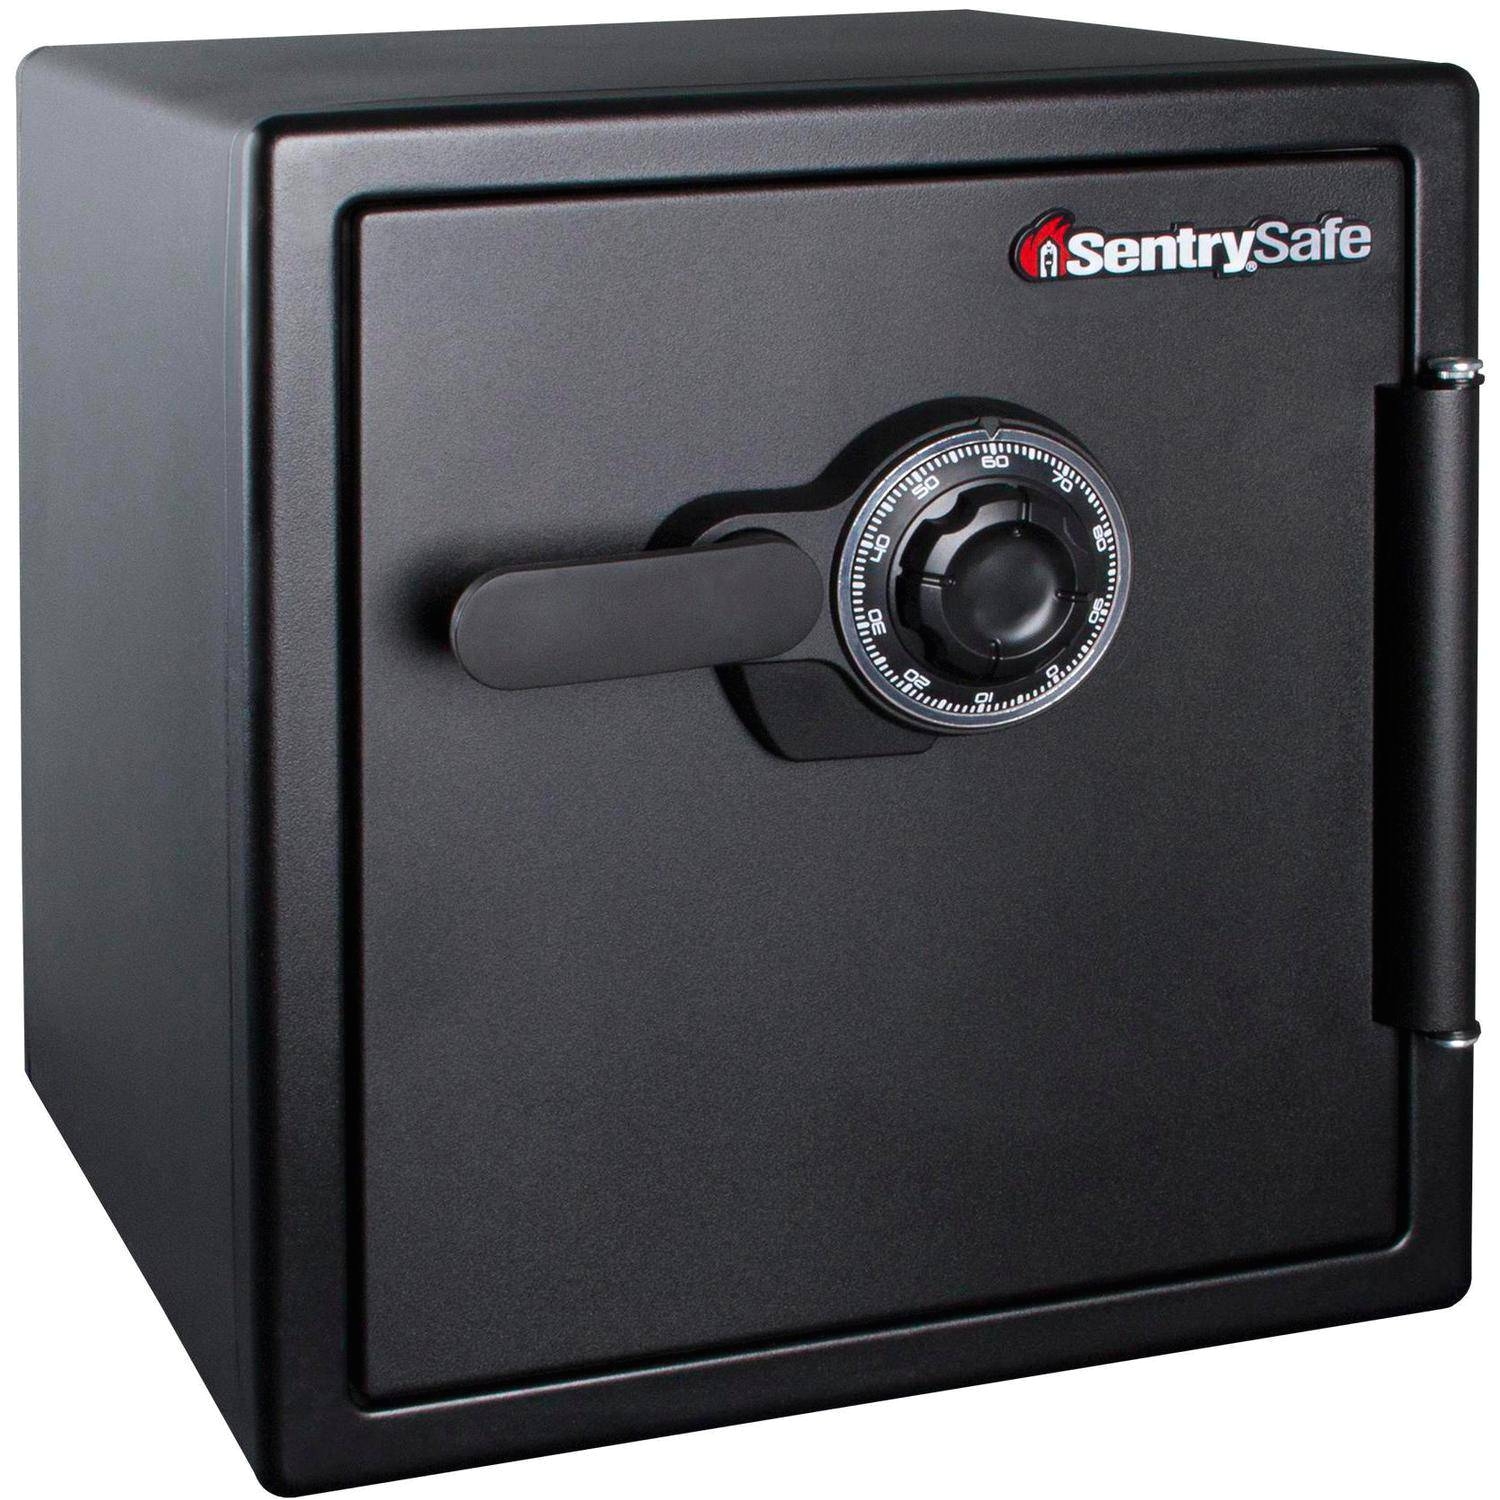 Sentry Fireproof Floor Safe Sentrysafe Fire and Water Safe Extra Large Combination Safe 1 23